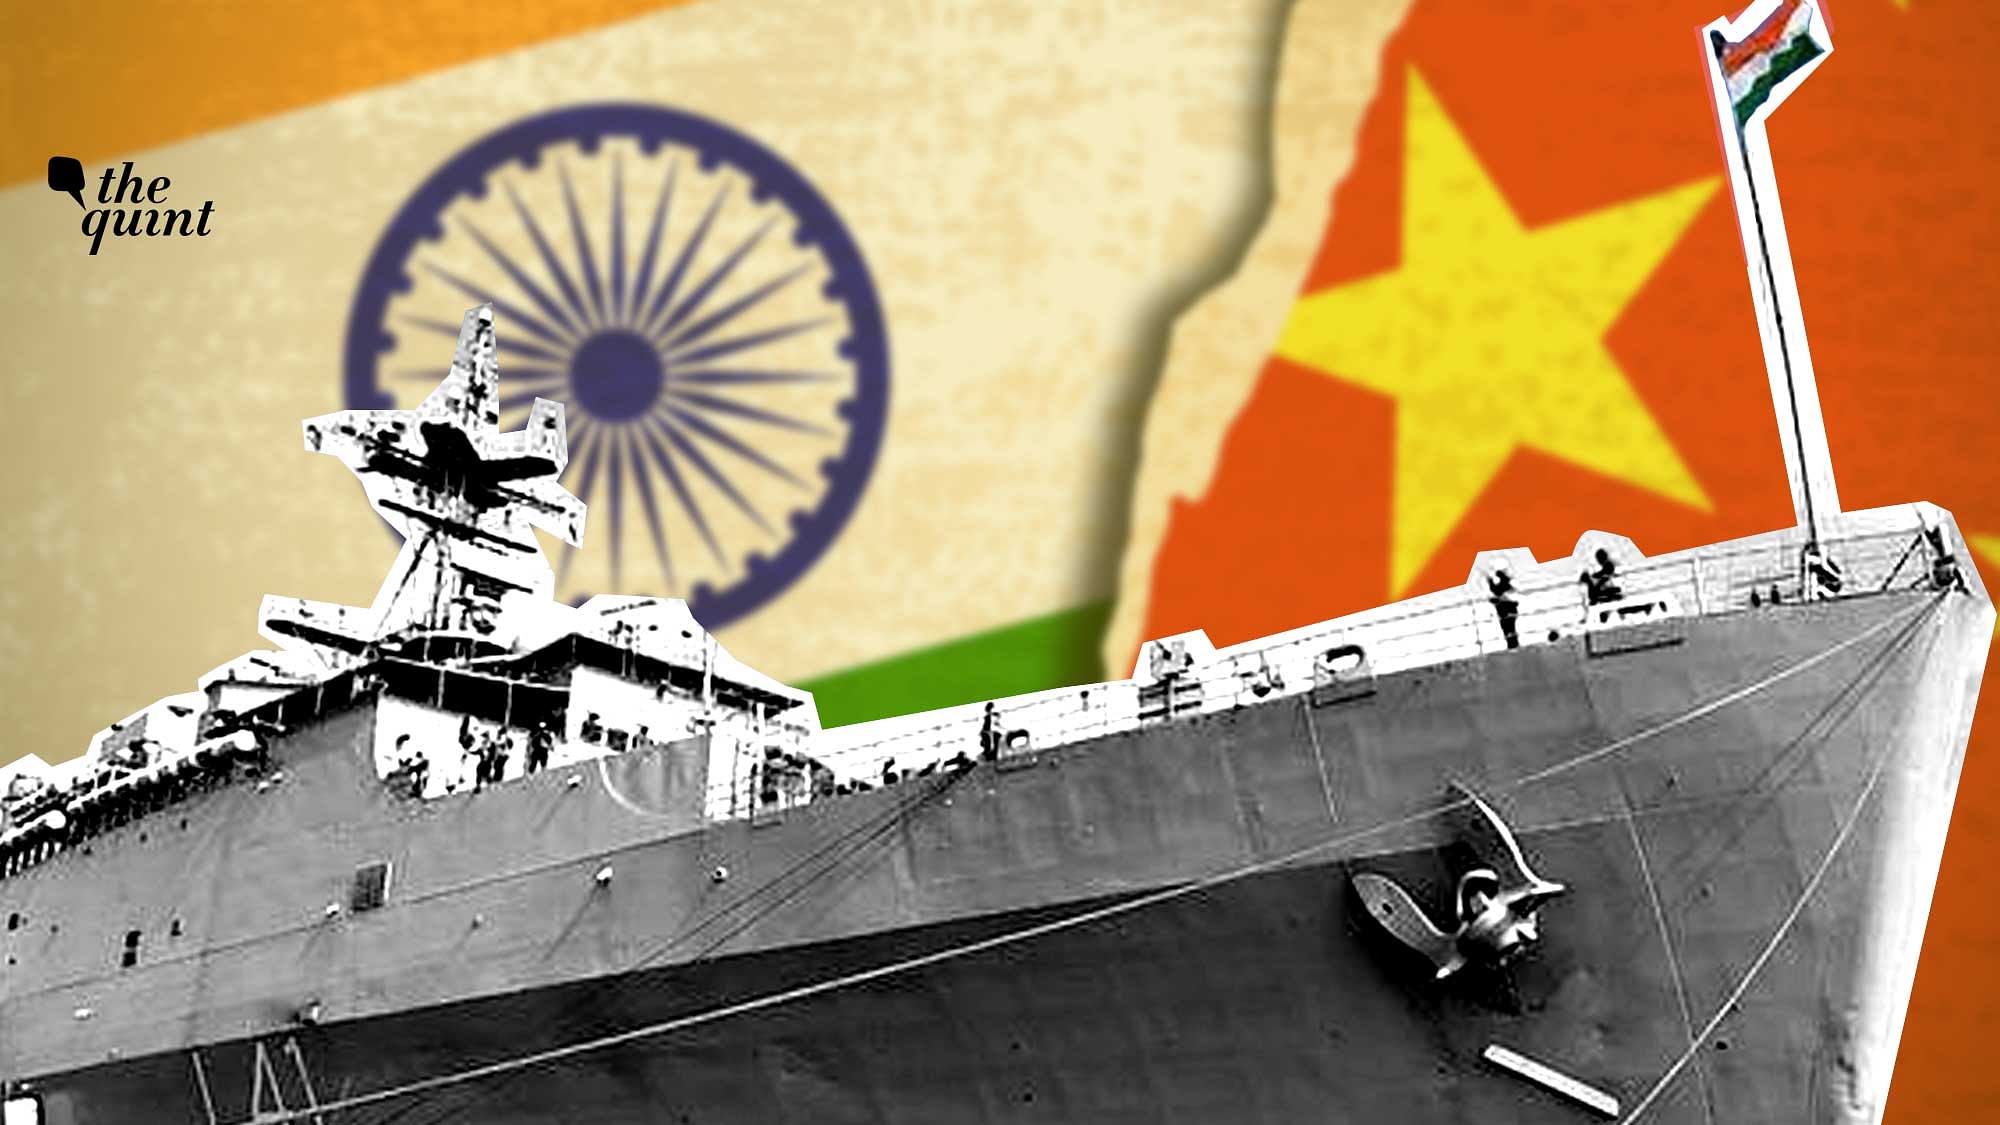 Archival image of INS Jalashwa, and India and China’s flags (in the background) used for representational purposes.